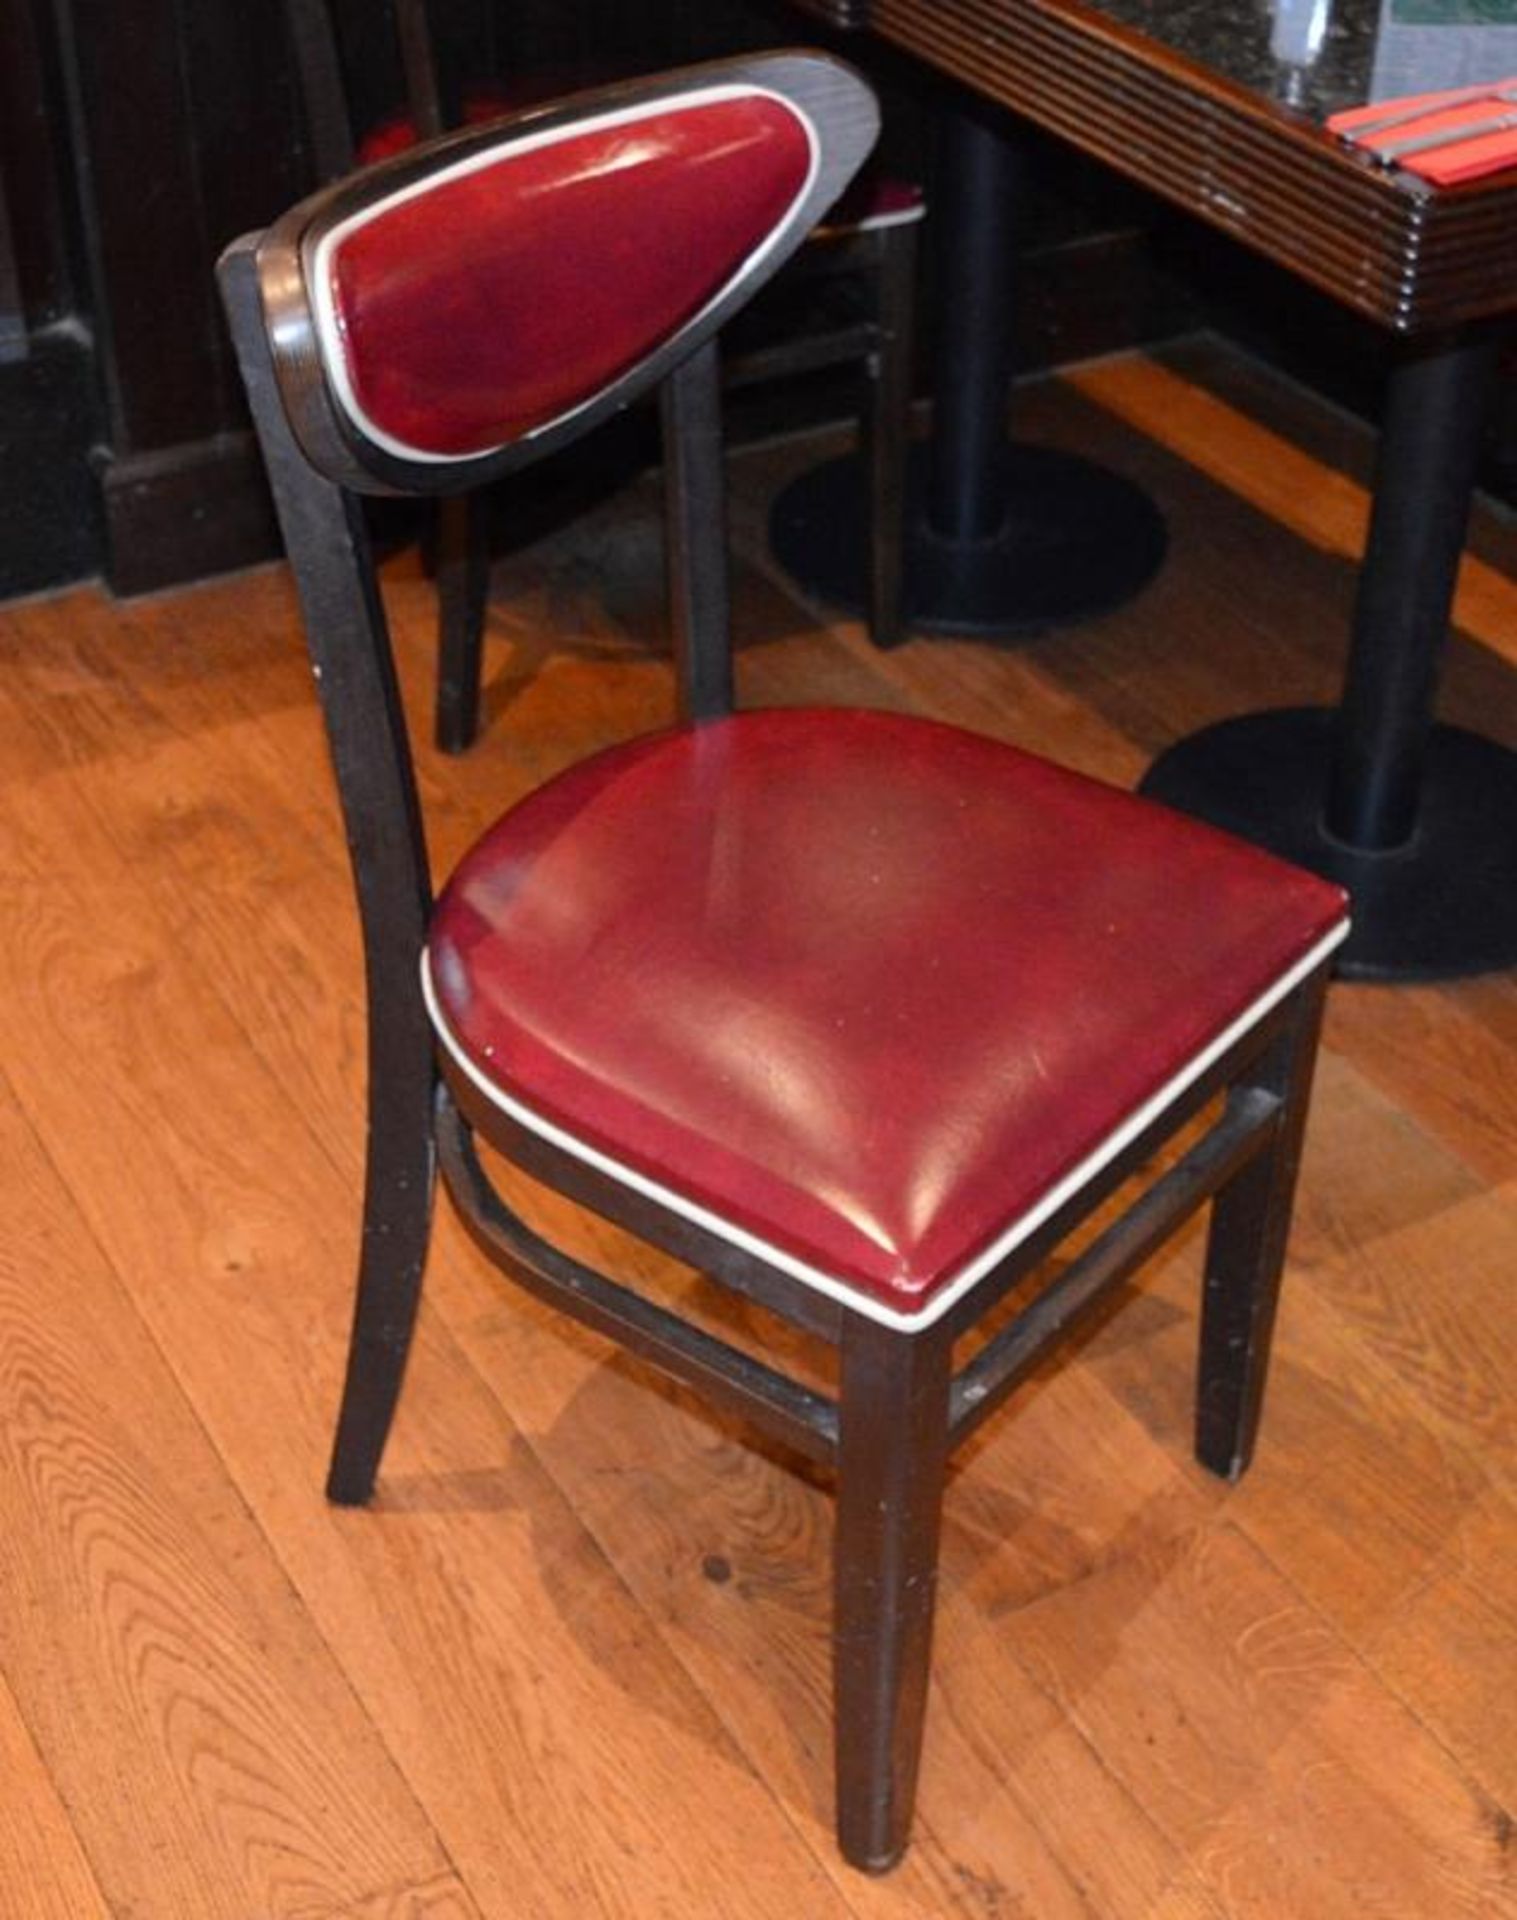 4 x American Diner Restaurant Chairs - Each Features Red Faux Leather Upholstery And White Piping -